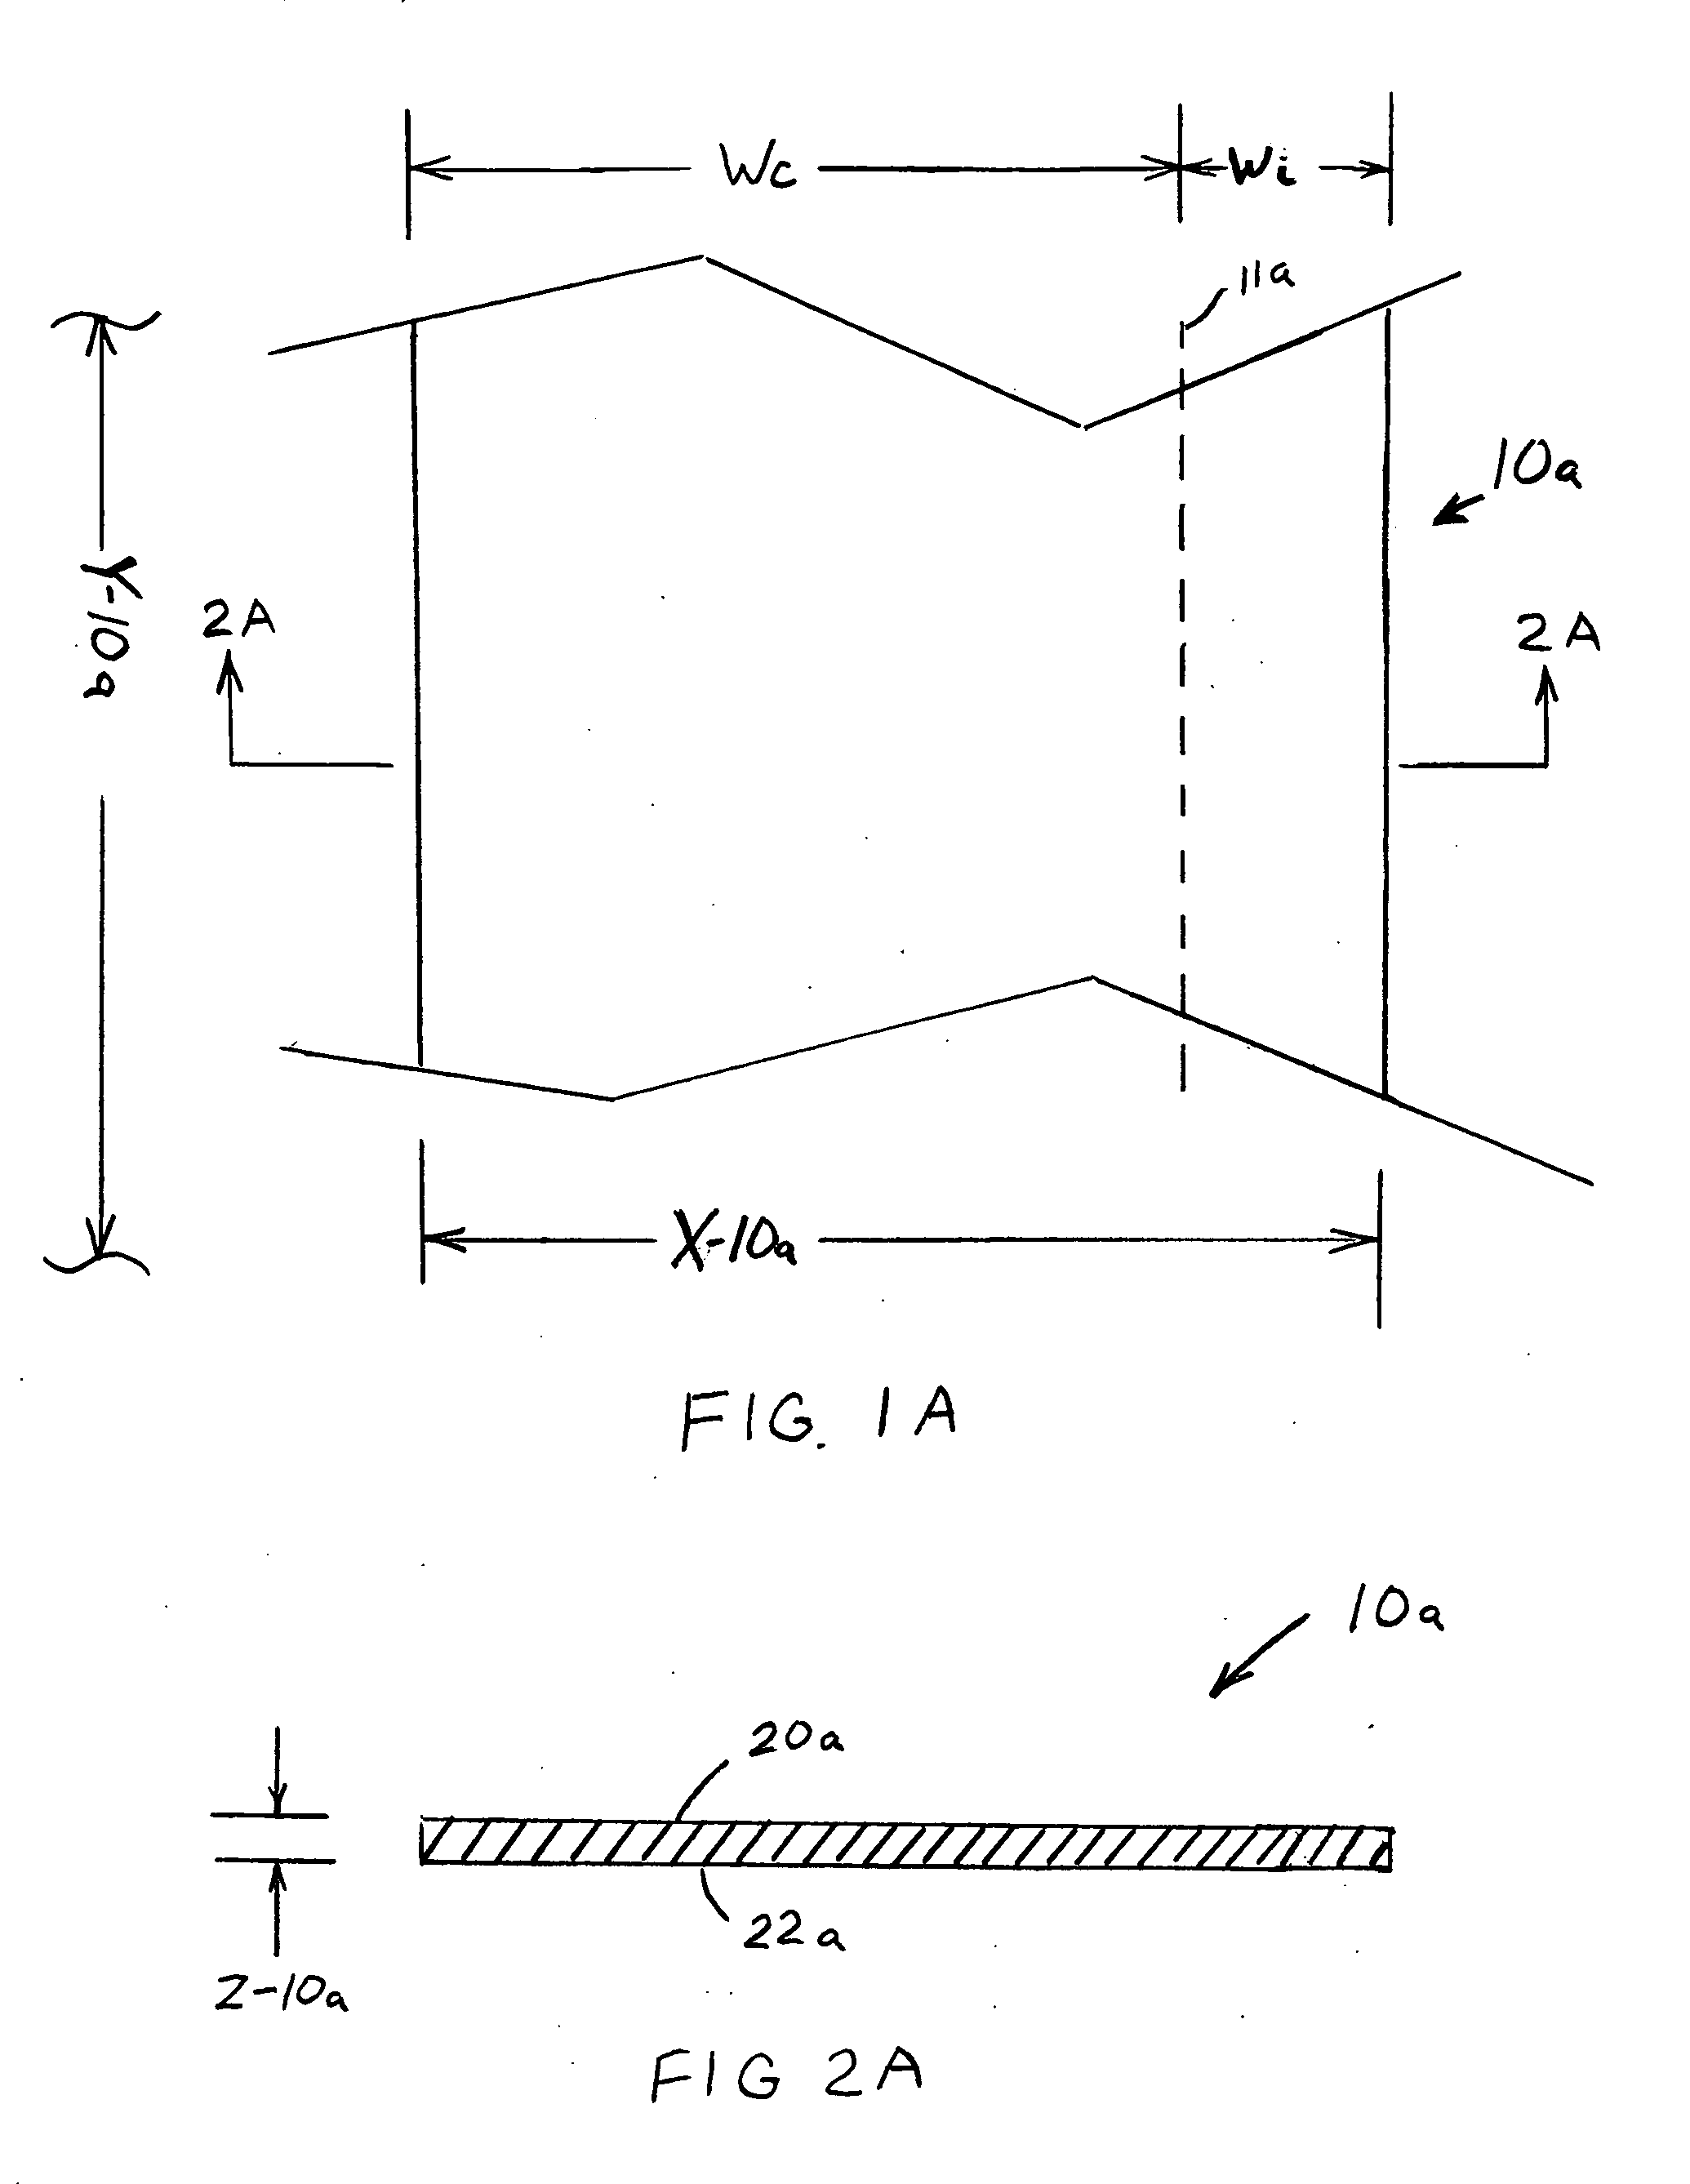 Substrate and collector grid structures for integrated photovoltaic arrays and process of manufacture of such arrays